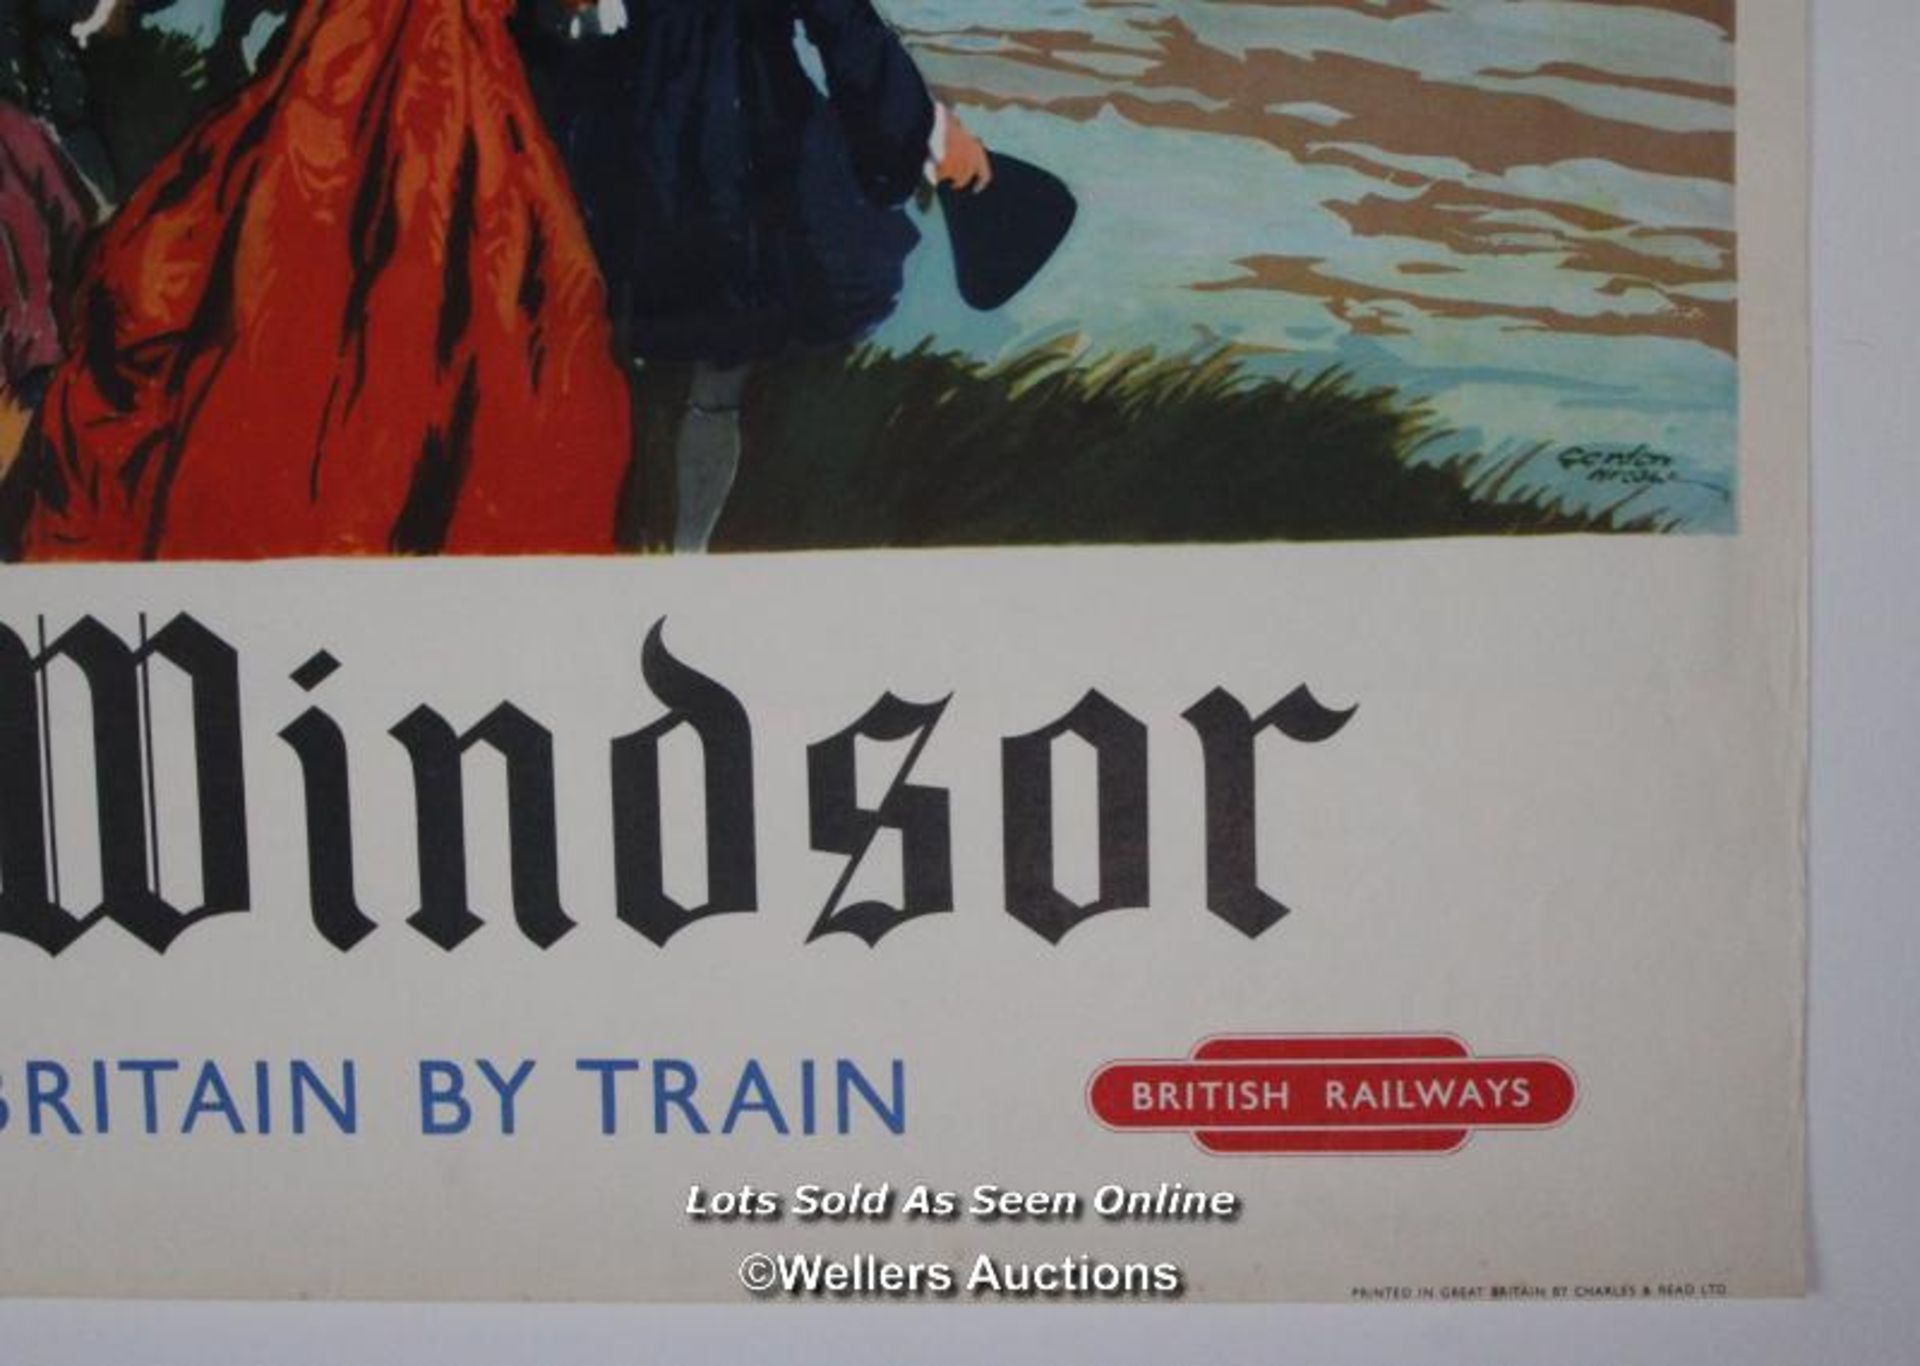 Vintage British Railways poster 'Windsor - See Britain By Train' by Gordon Nicoll double royal,25 - Image 6 of 6